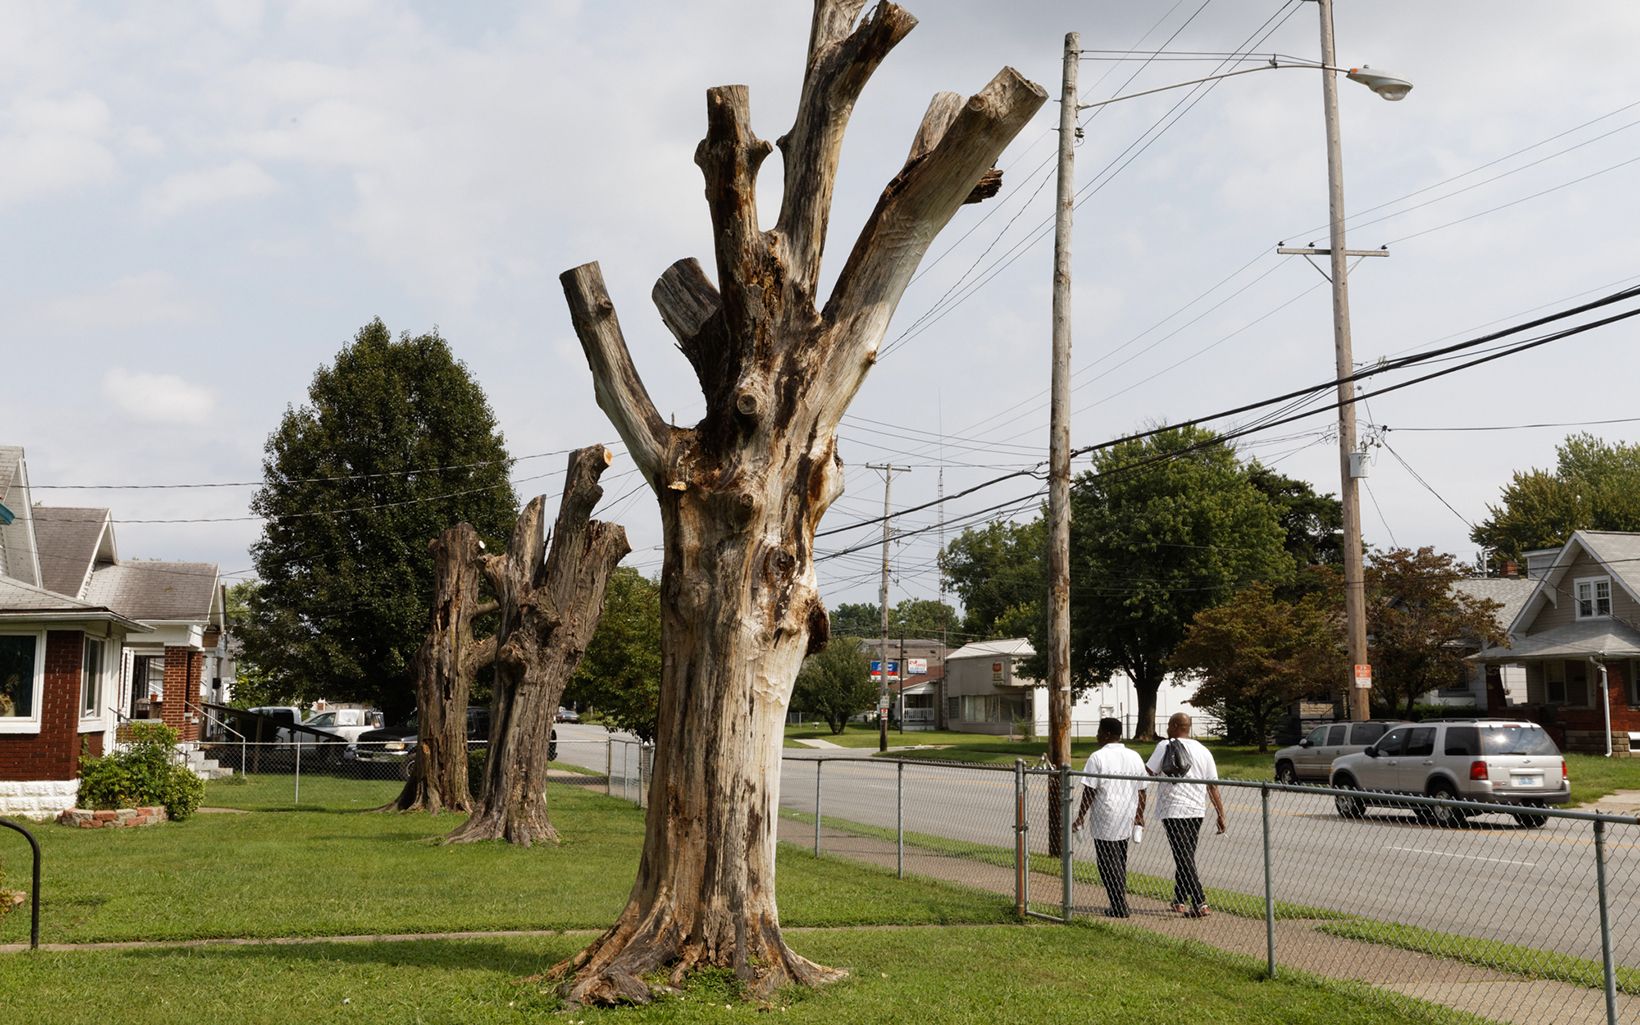 One of three dead trees on Beach Avenue in South Louisville. Storms, development and insect pests like emerald ash borer result in the loss of 150 trees per day in Louisville.